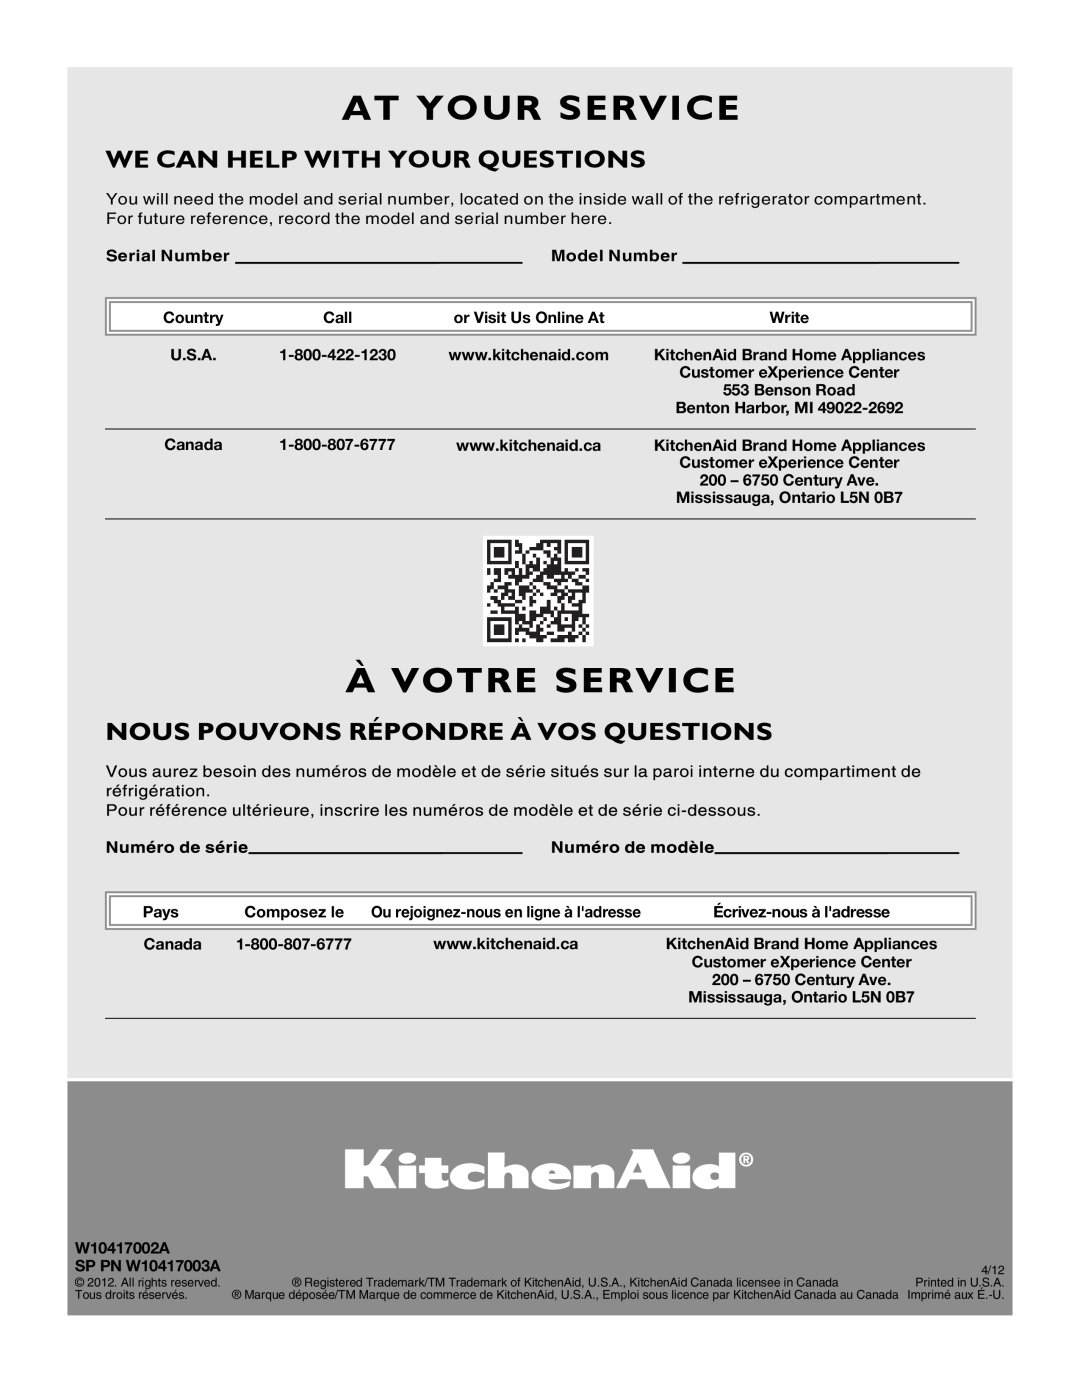 KitchenAid W10417002A Serial Number, Model Number, Country, Call, or Visit Us Online At, U.S.A, Customer eXperience Center 